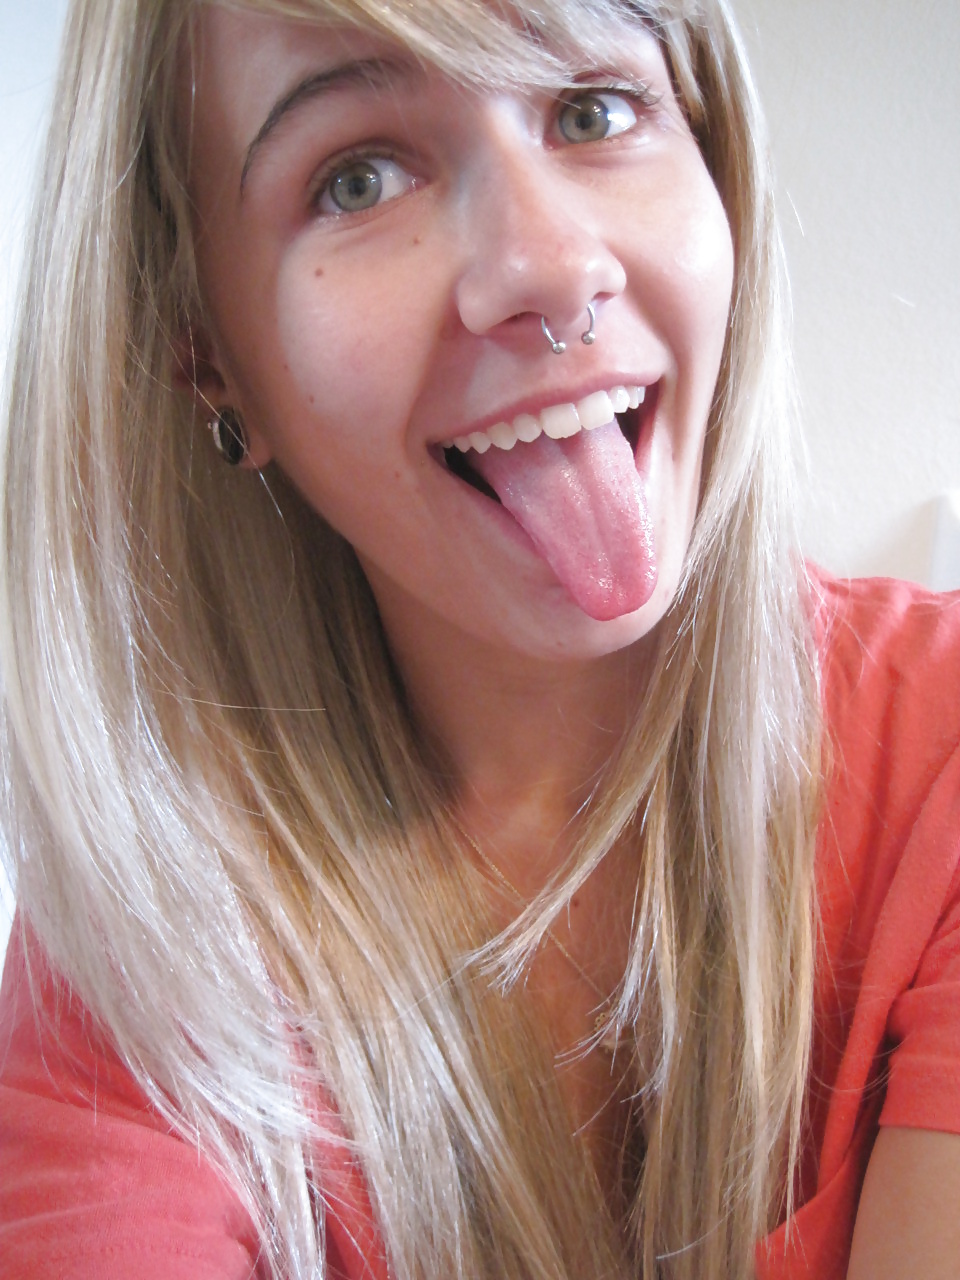 Free Teen Girls - tongue out and mouth open - Part 1 photos